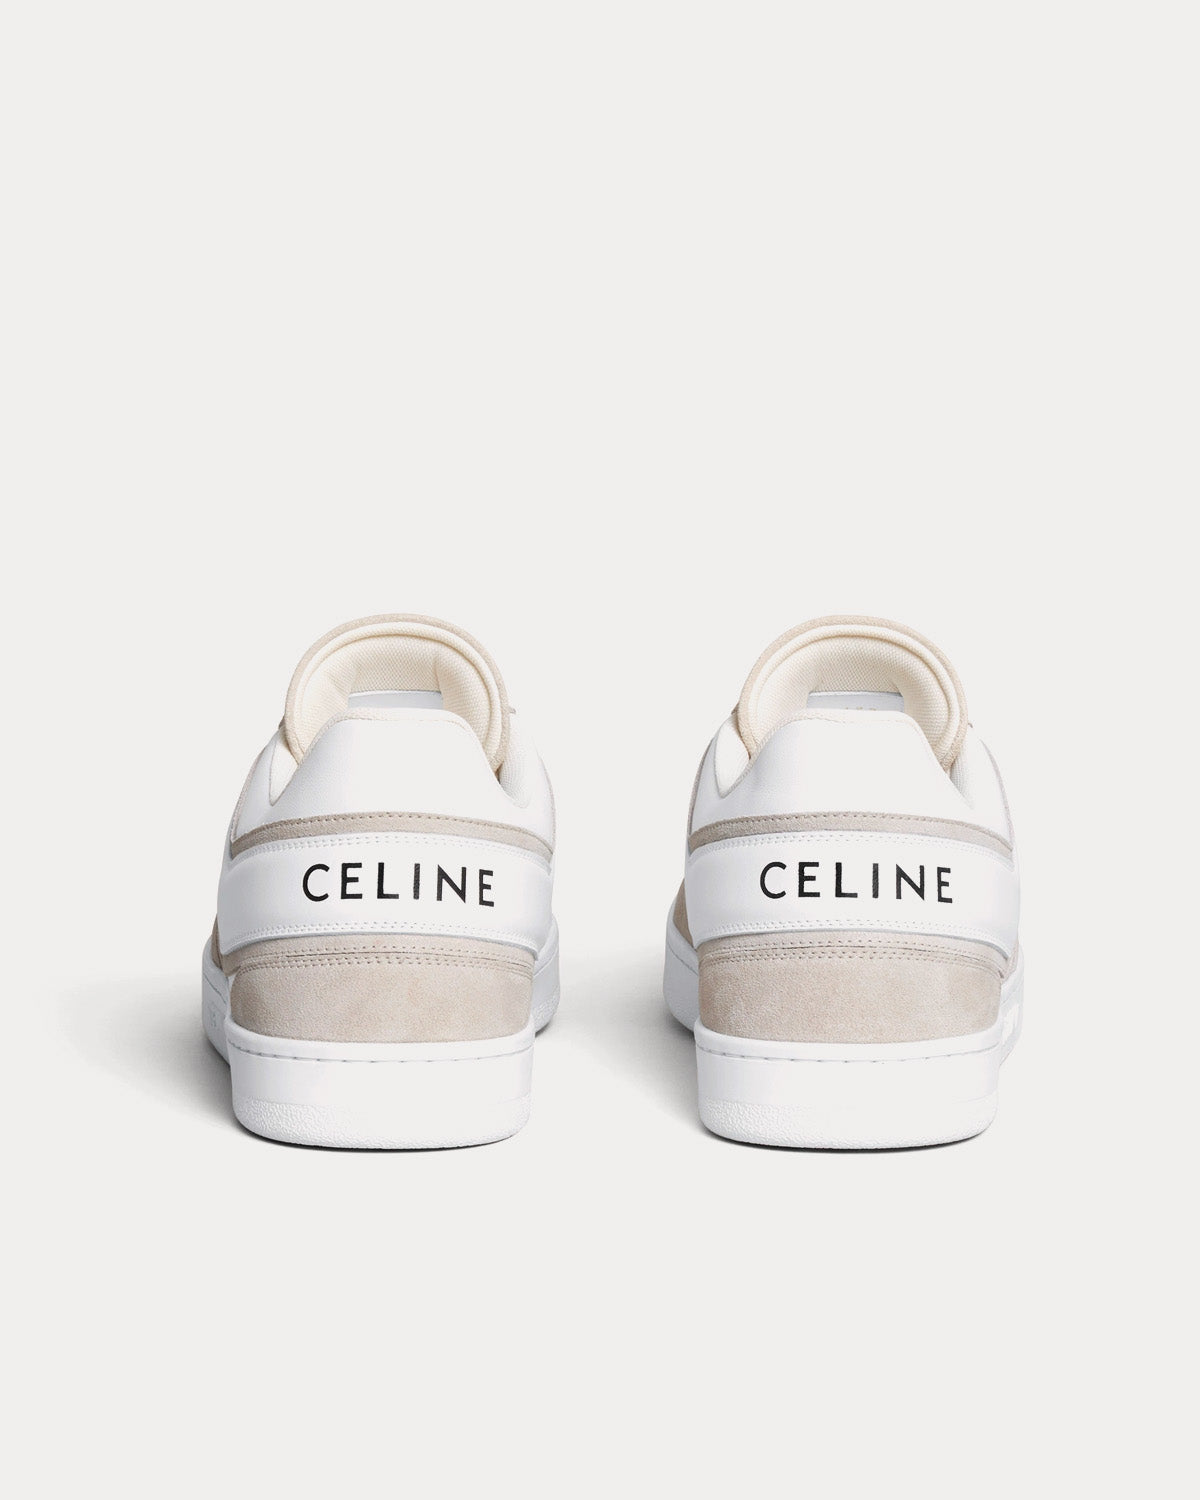 Celine - Lace-Up Suede & Calfskin Leather Light Beige / Optic White Low Top Sneakers